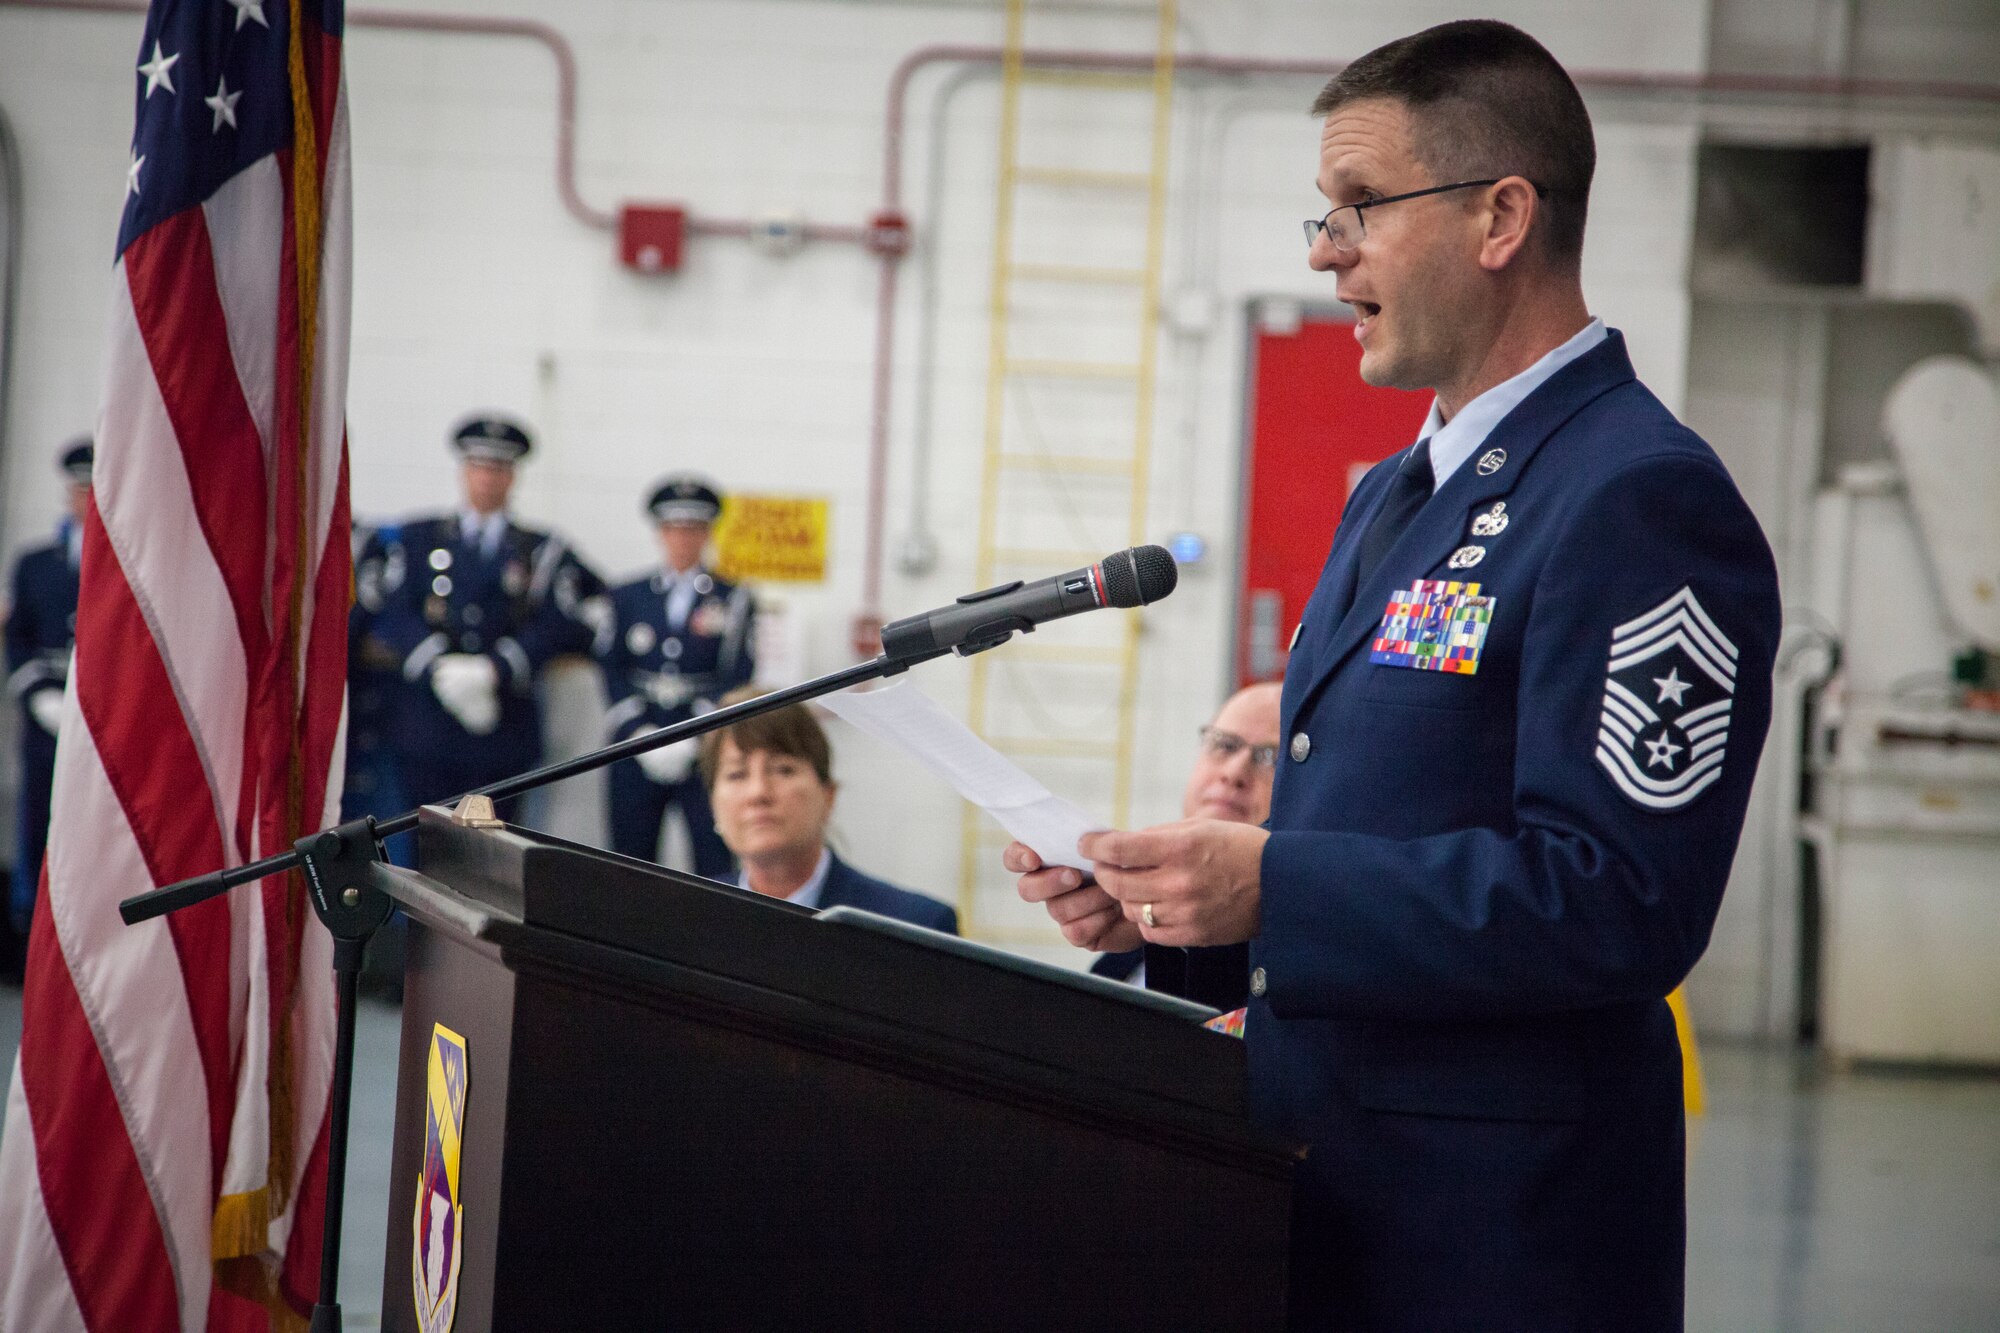 U.S. Air Force Command Chief Master Sgt. Thomas Fredrickson speaks during a change of authority ceremony Oct. 14, 2017 at the 128th Air Refueling Wing,